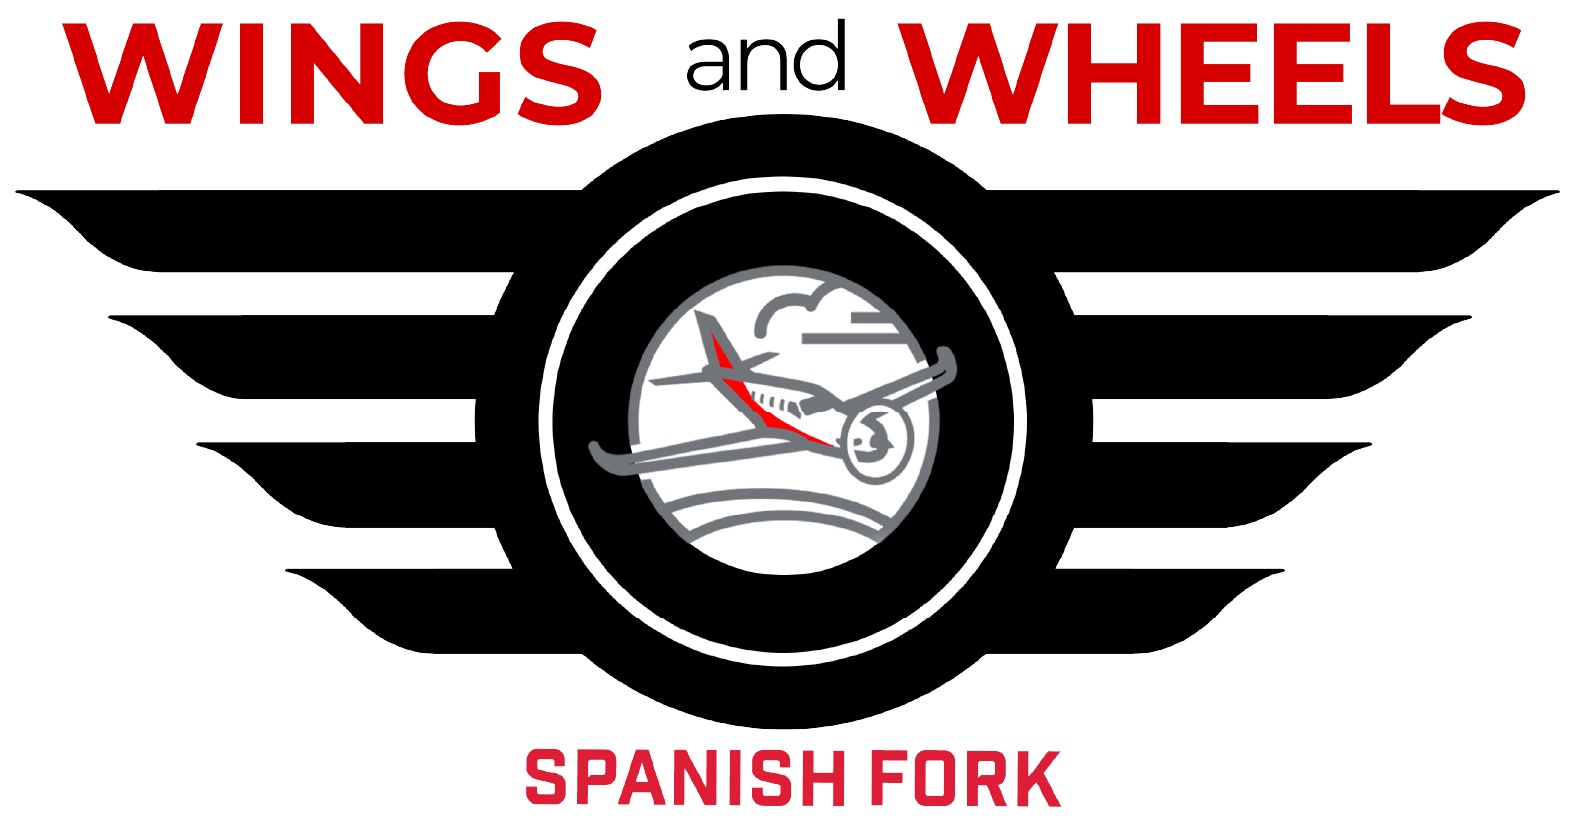 Wings and Wheels - Spanish Fork